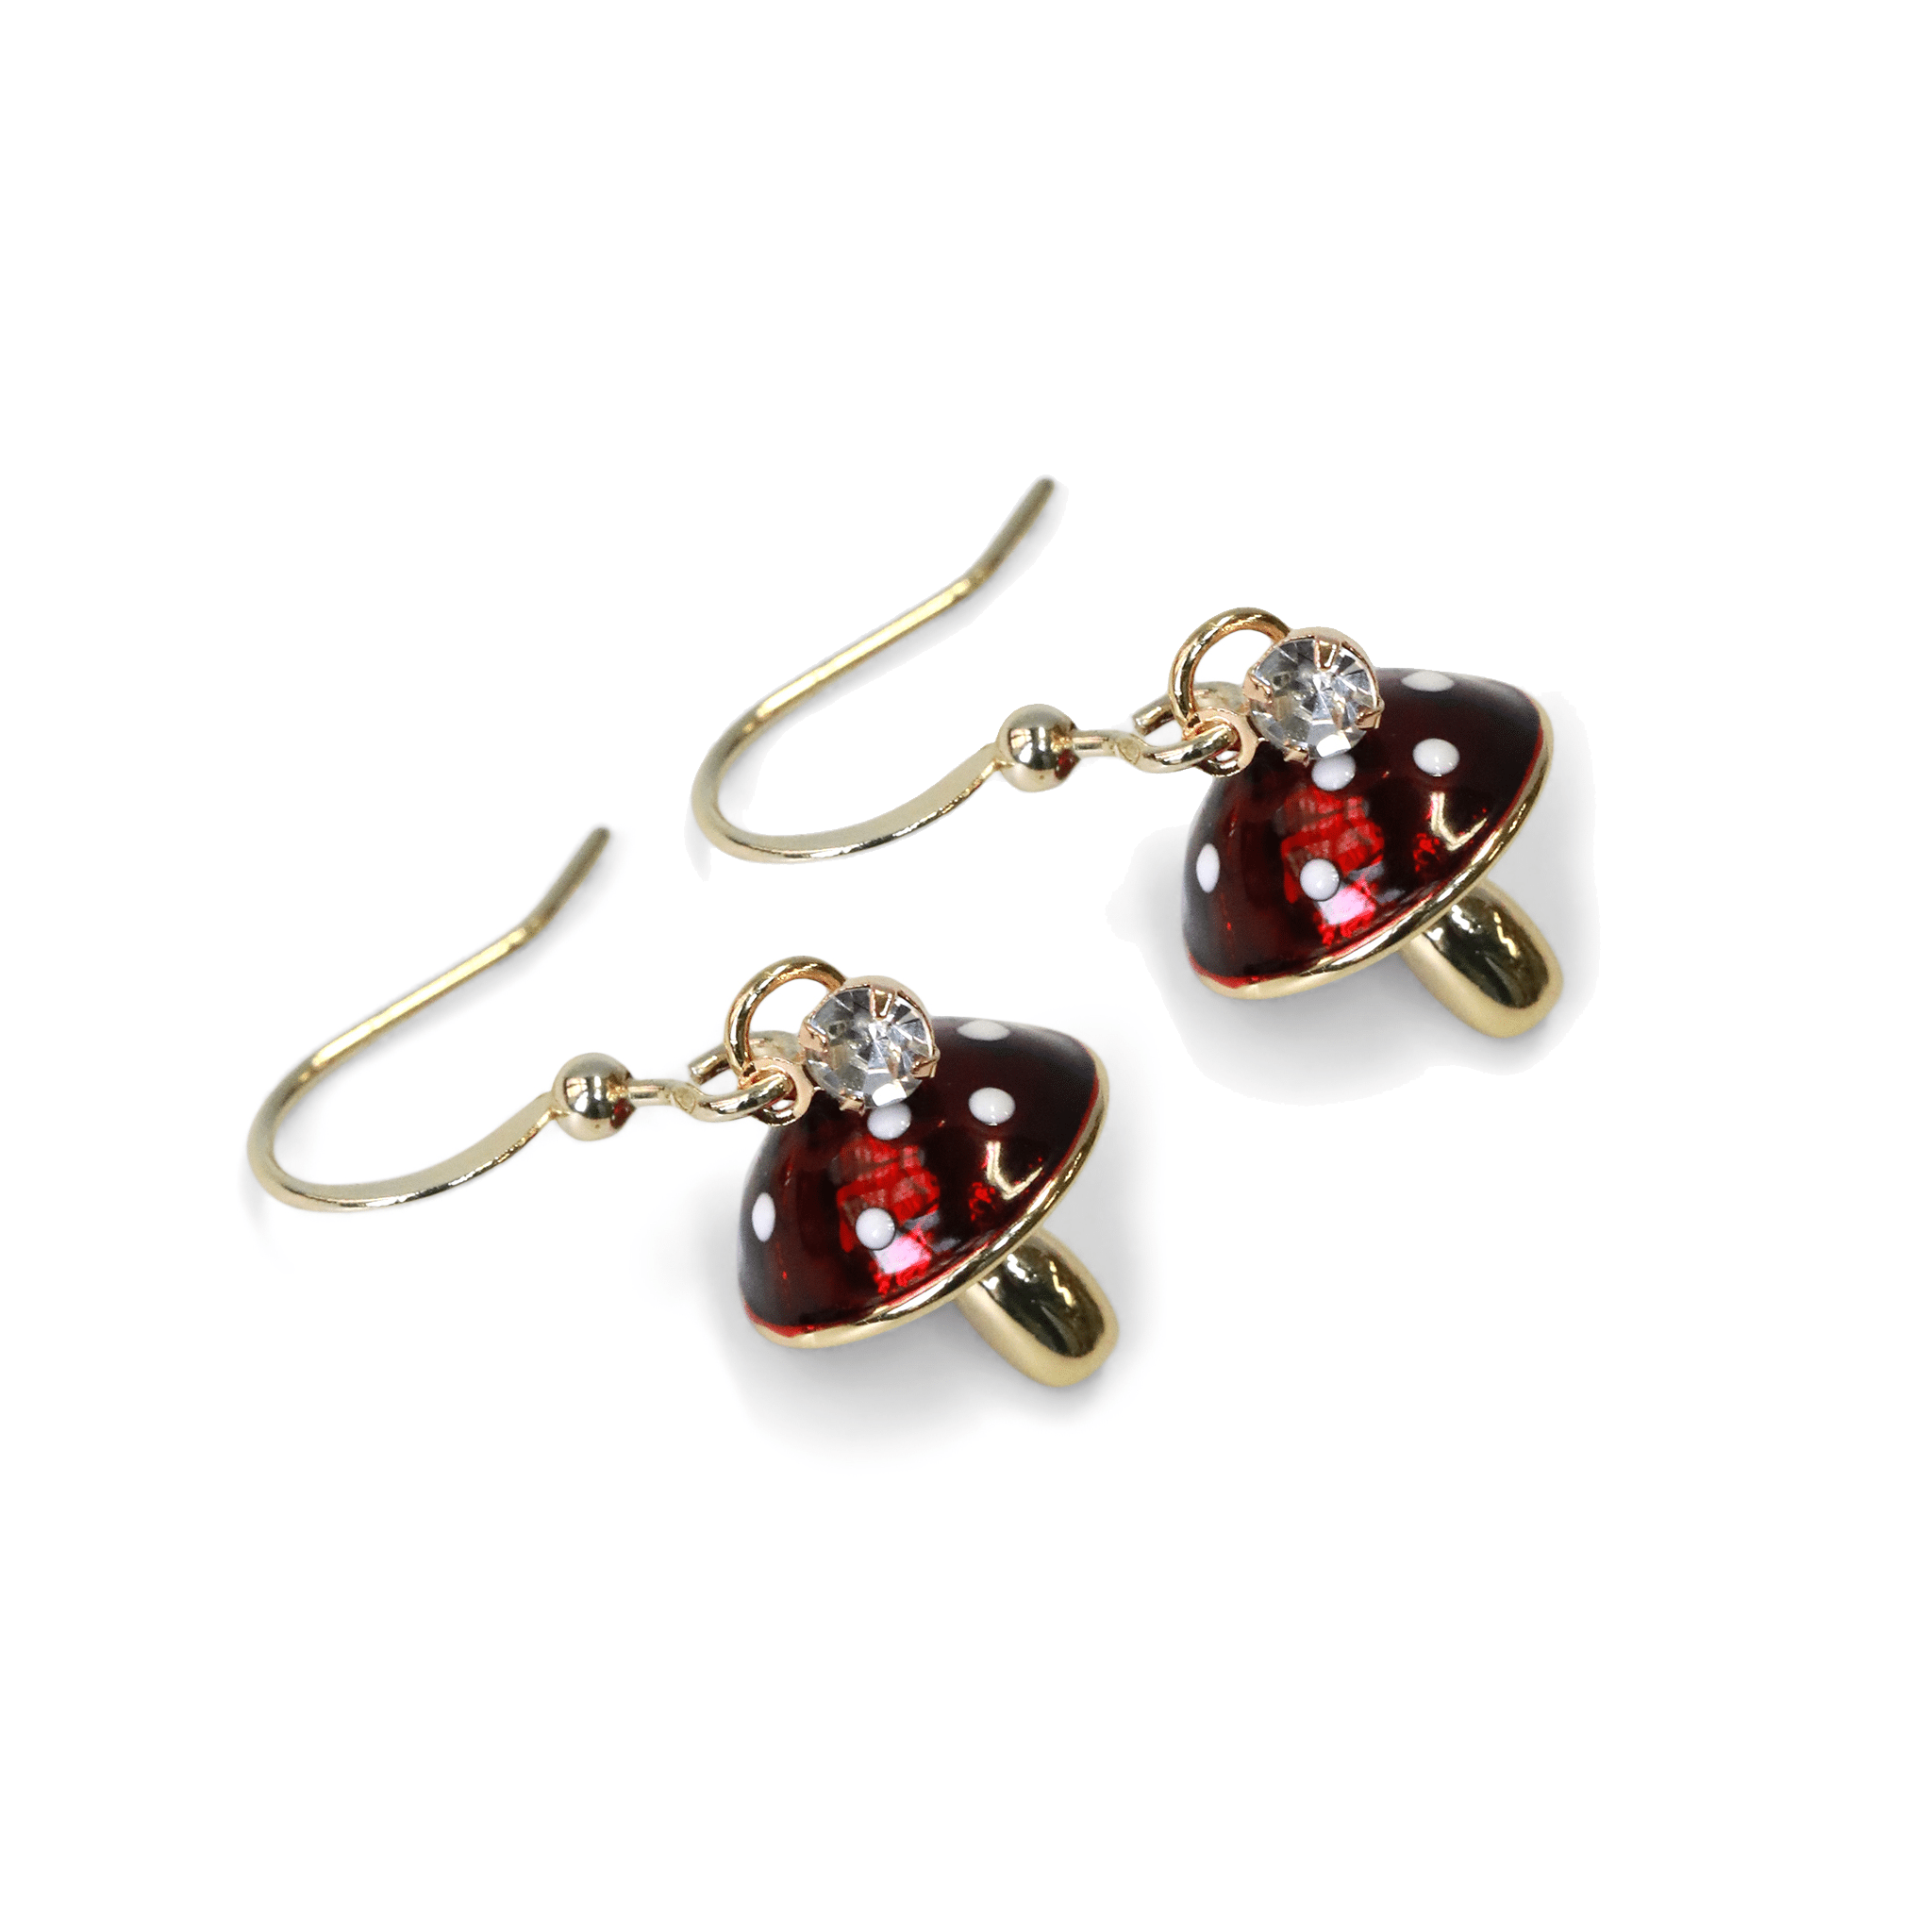 tiny mushroom charm earrings in red with white dots on 14kt gold filled earring hooks with tiny crystal charms cover image